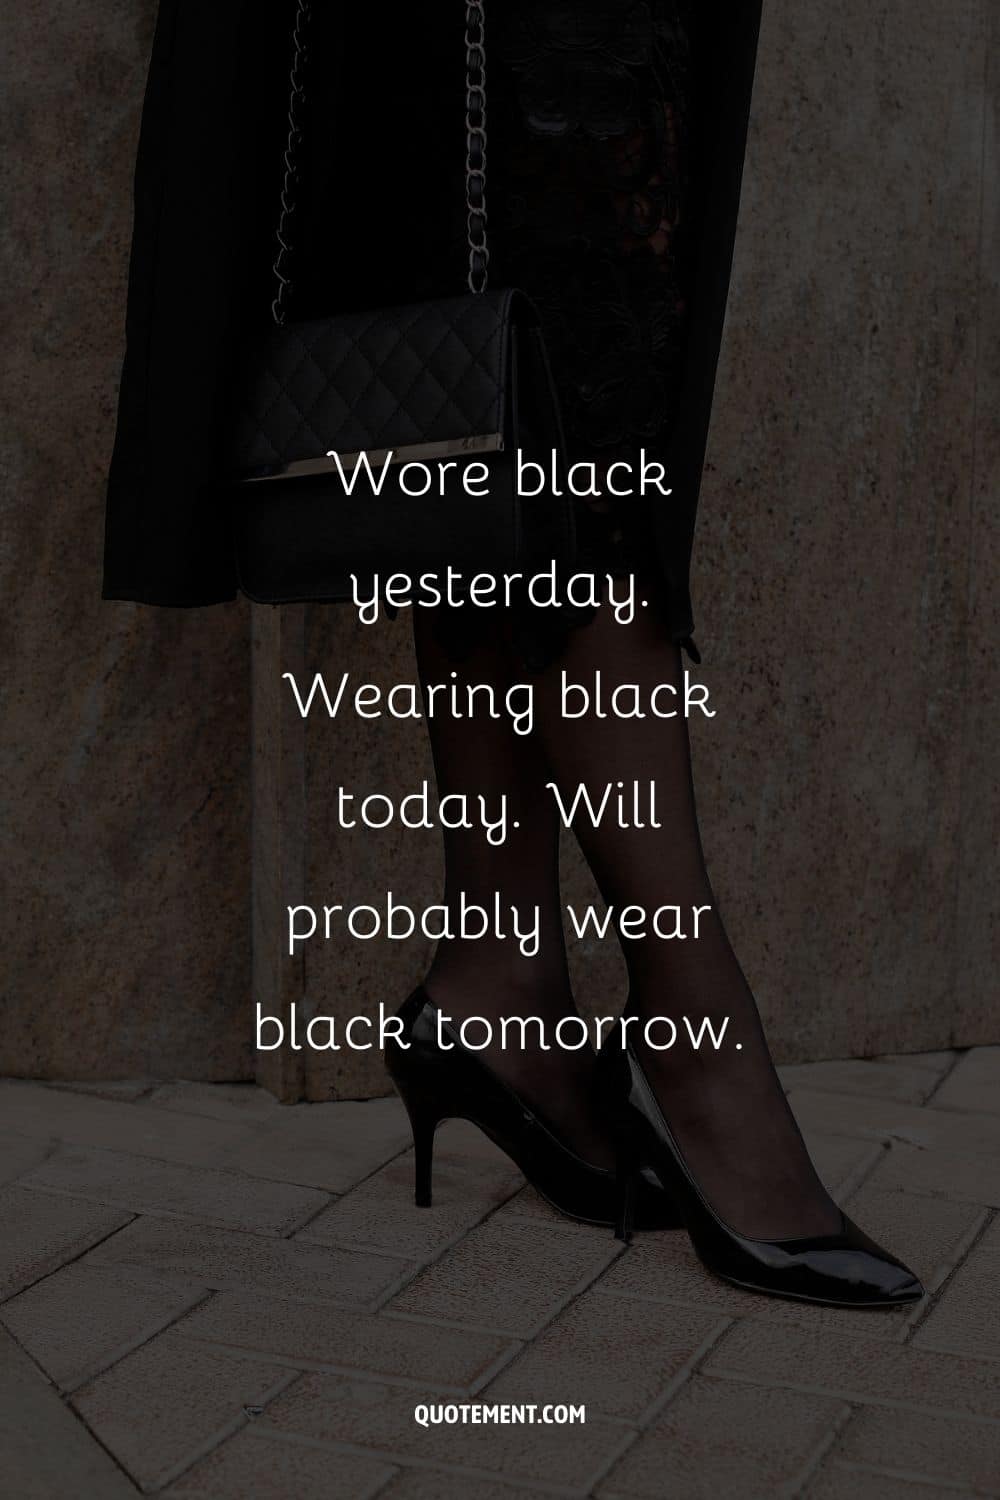 Wore black yesterday. Wearing black today. Will probably wear black tomorrow.